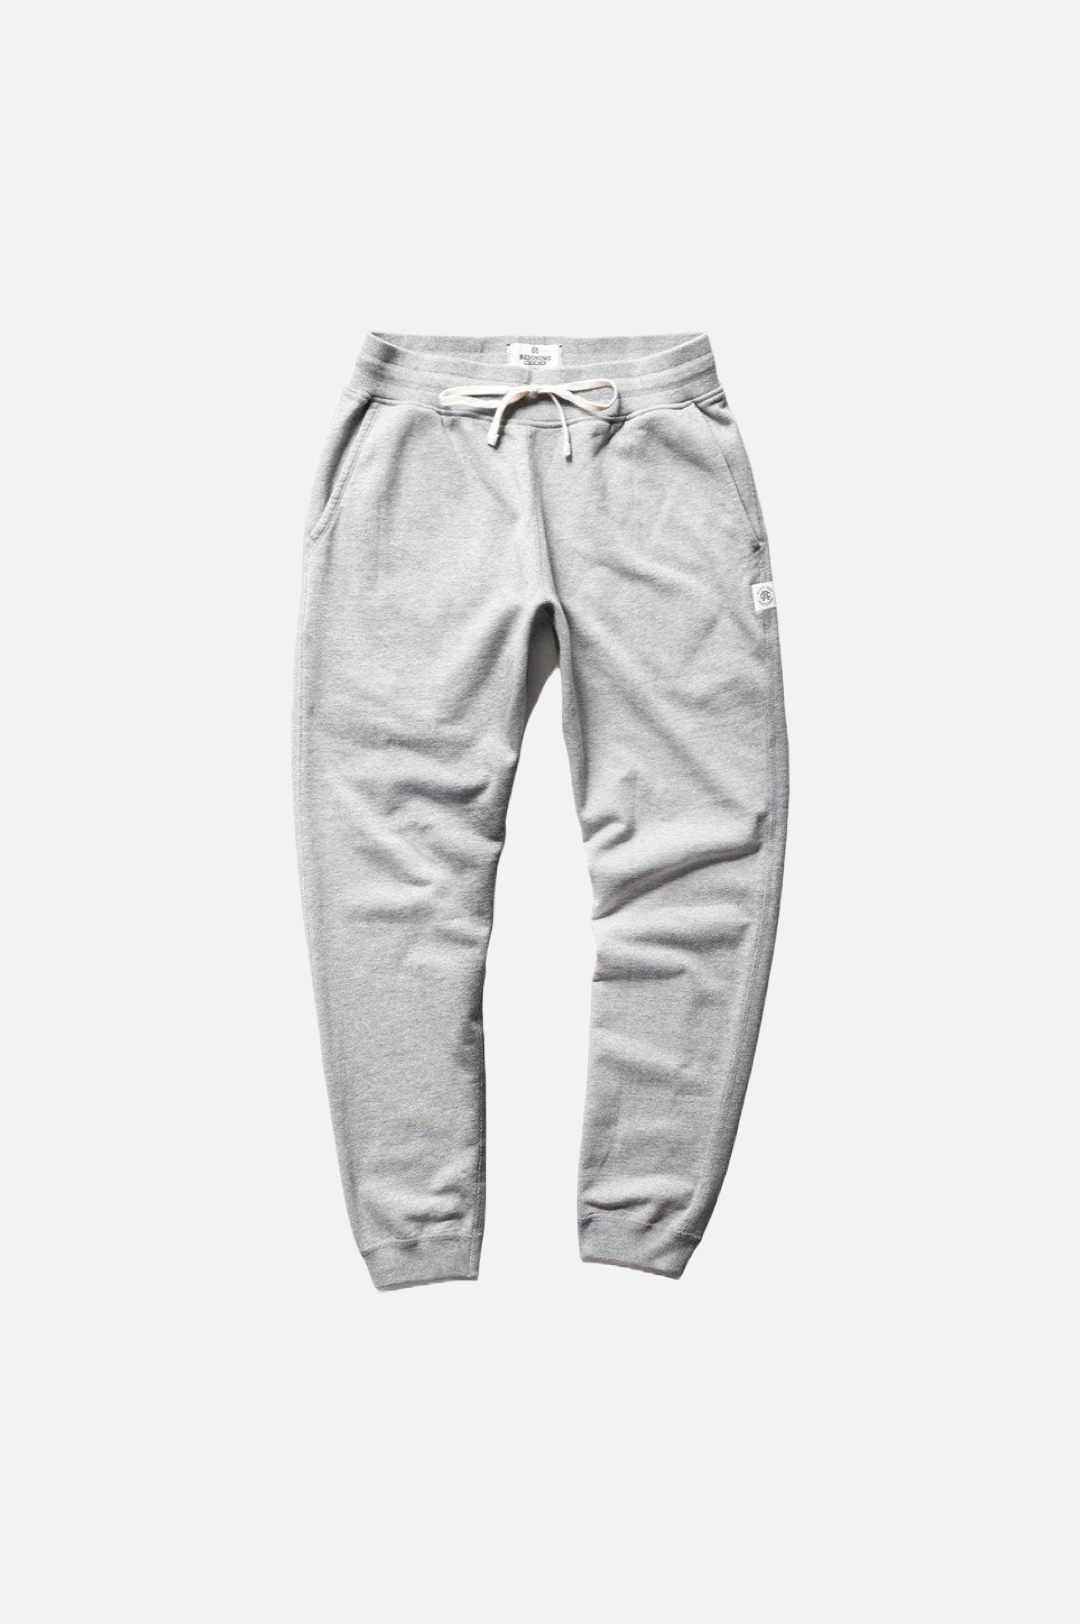 Reigning Champ Midweight Slim Fit Sweatpant Men Heather Grey